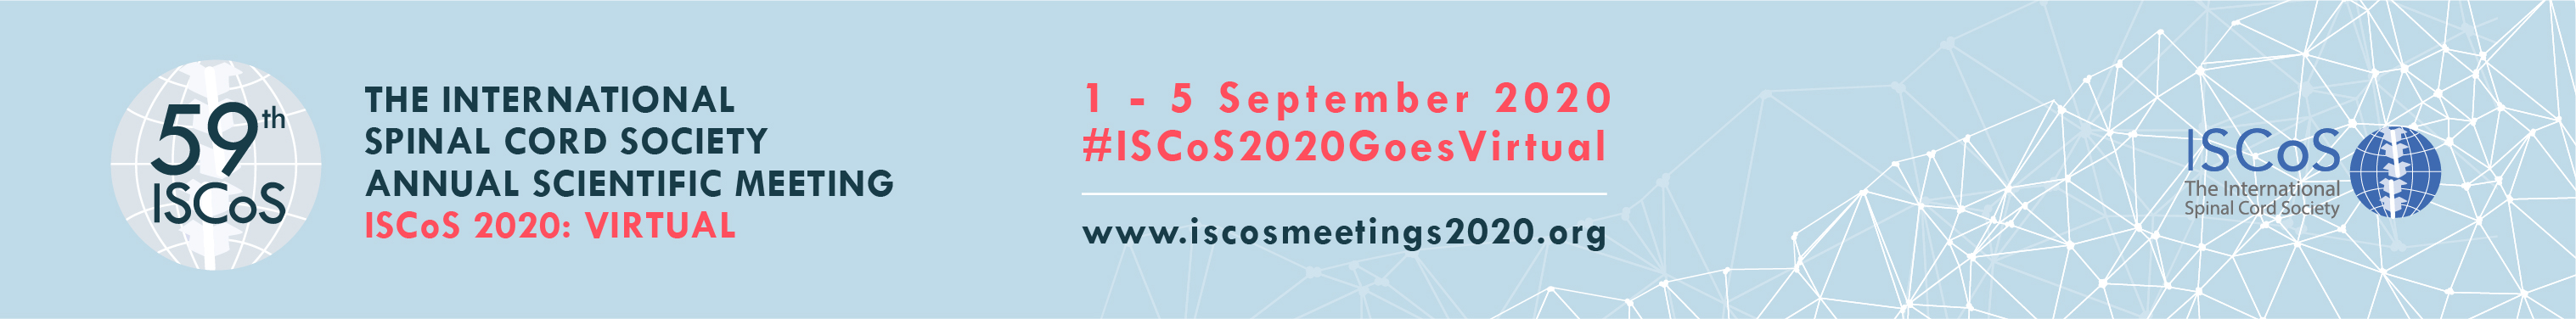 ISCoS2020 VIRTUAL Banners 728x90px LR